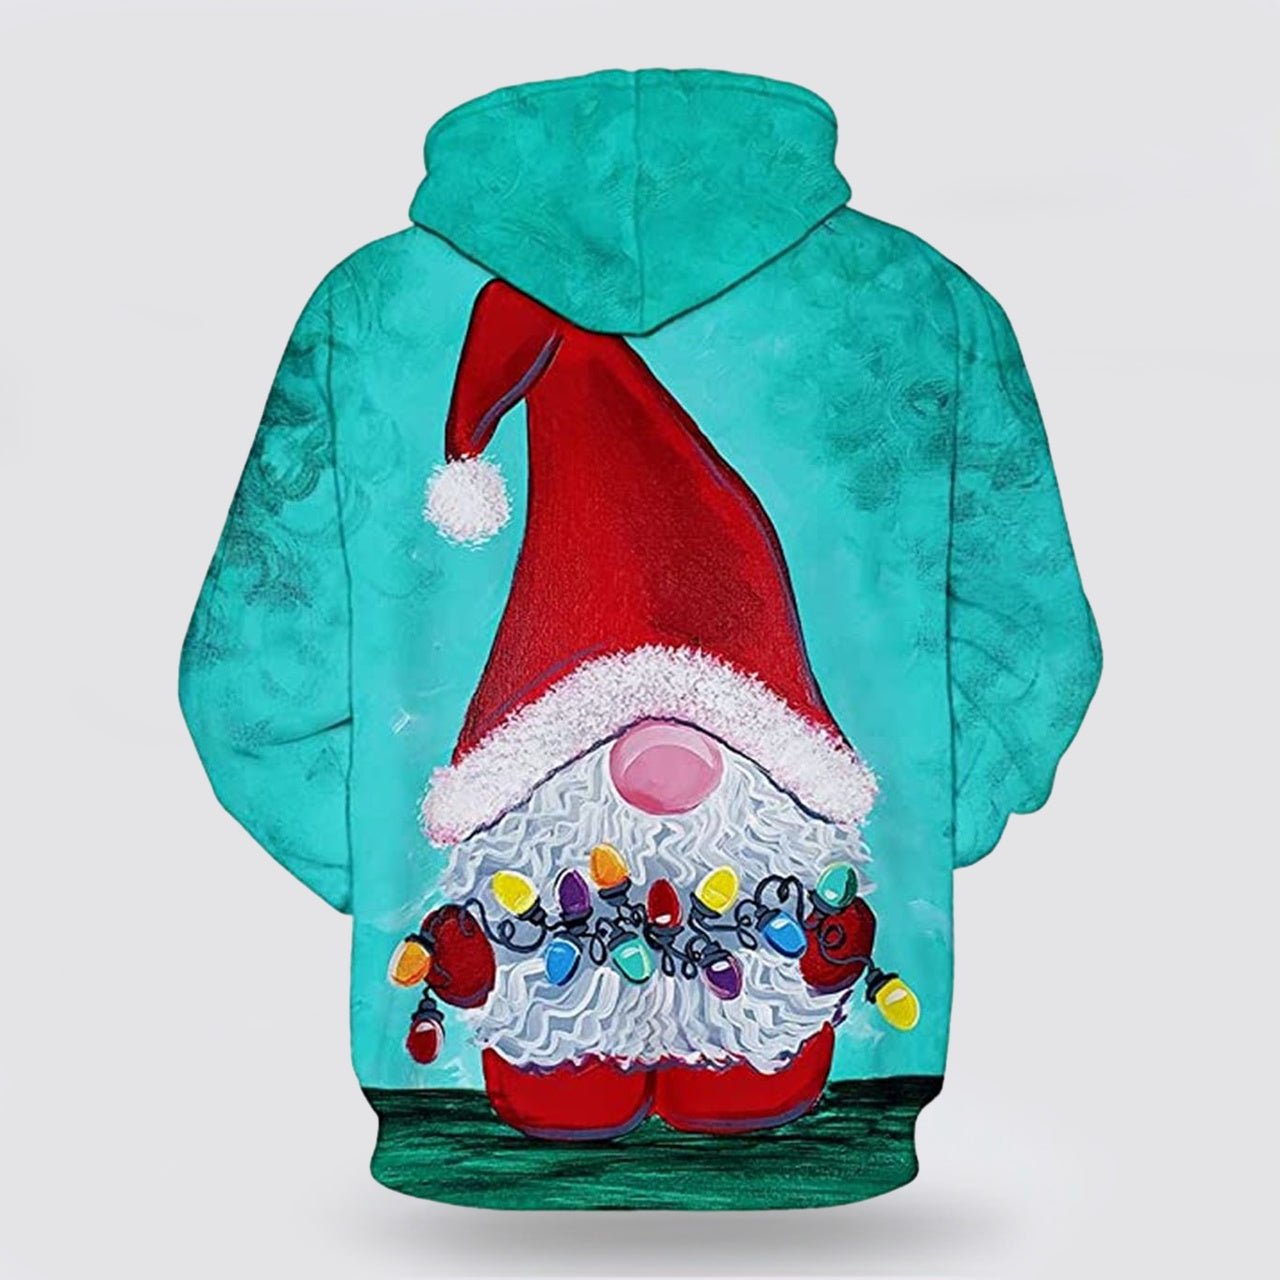 Christmas Hat Santa All Over Print 3D Hoodie For Men And Women, Christmas Gift, Warm Winter Clothes, Best Outfit Christmas